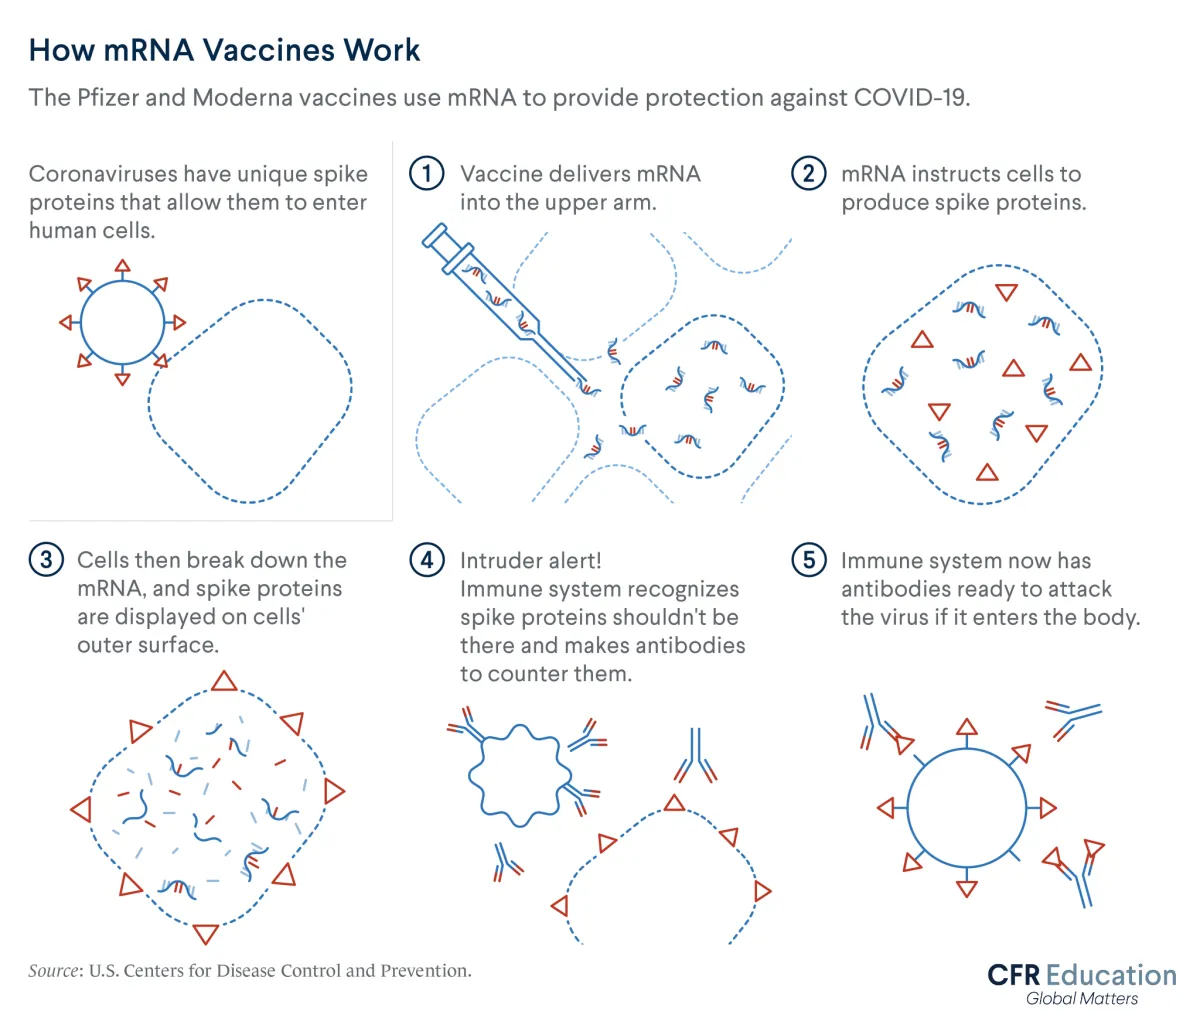 Graphic shows how the Pfizer and Moderna vaccines use mRNA to provide protection against COVID-19. For more info contact us at cfr_education@cfr.org.